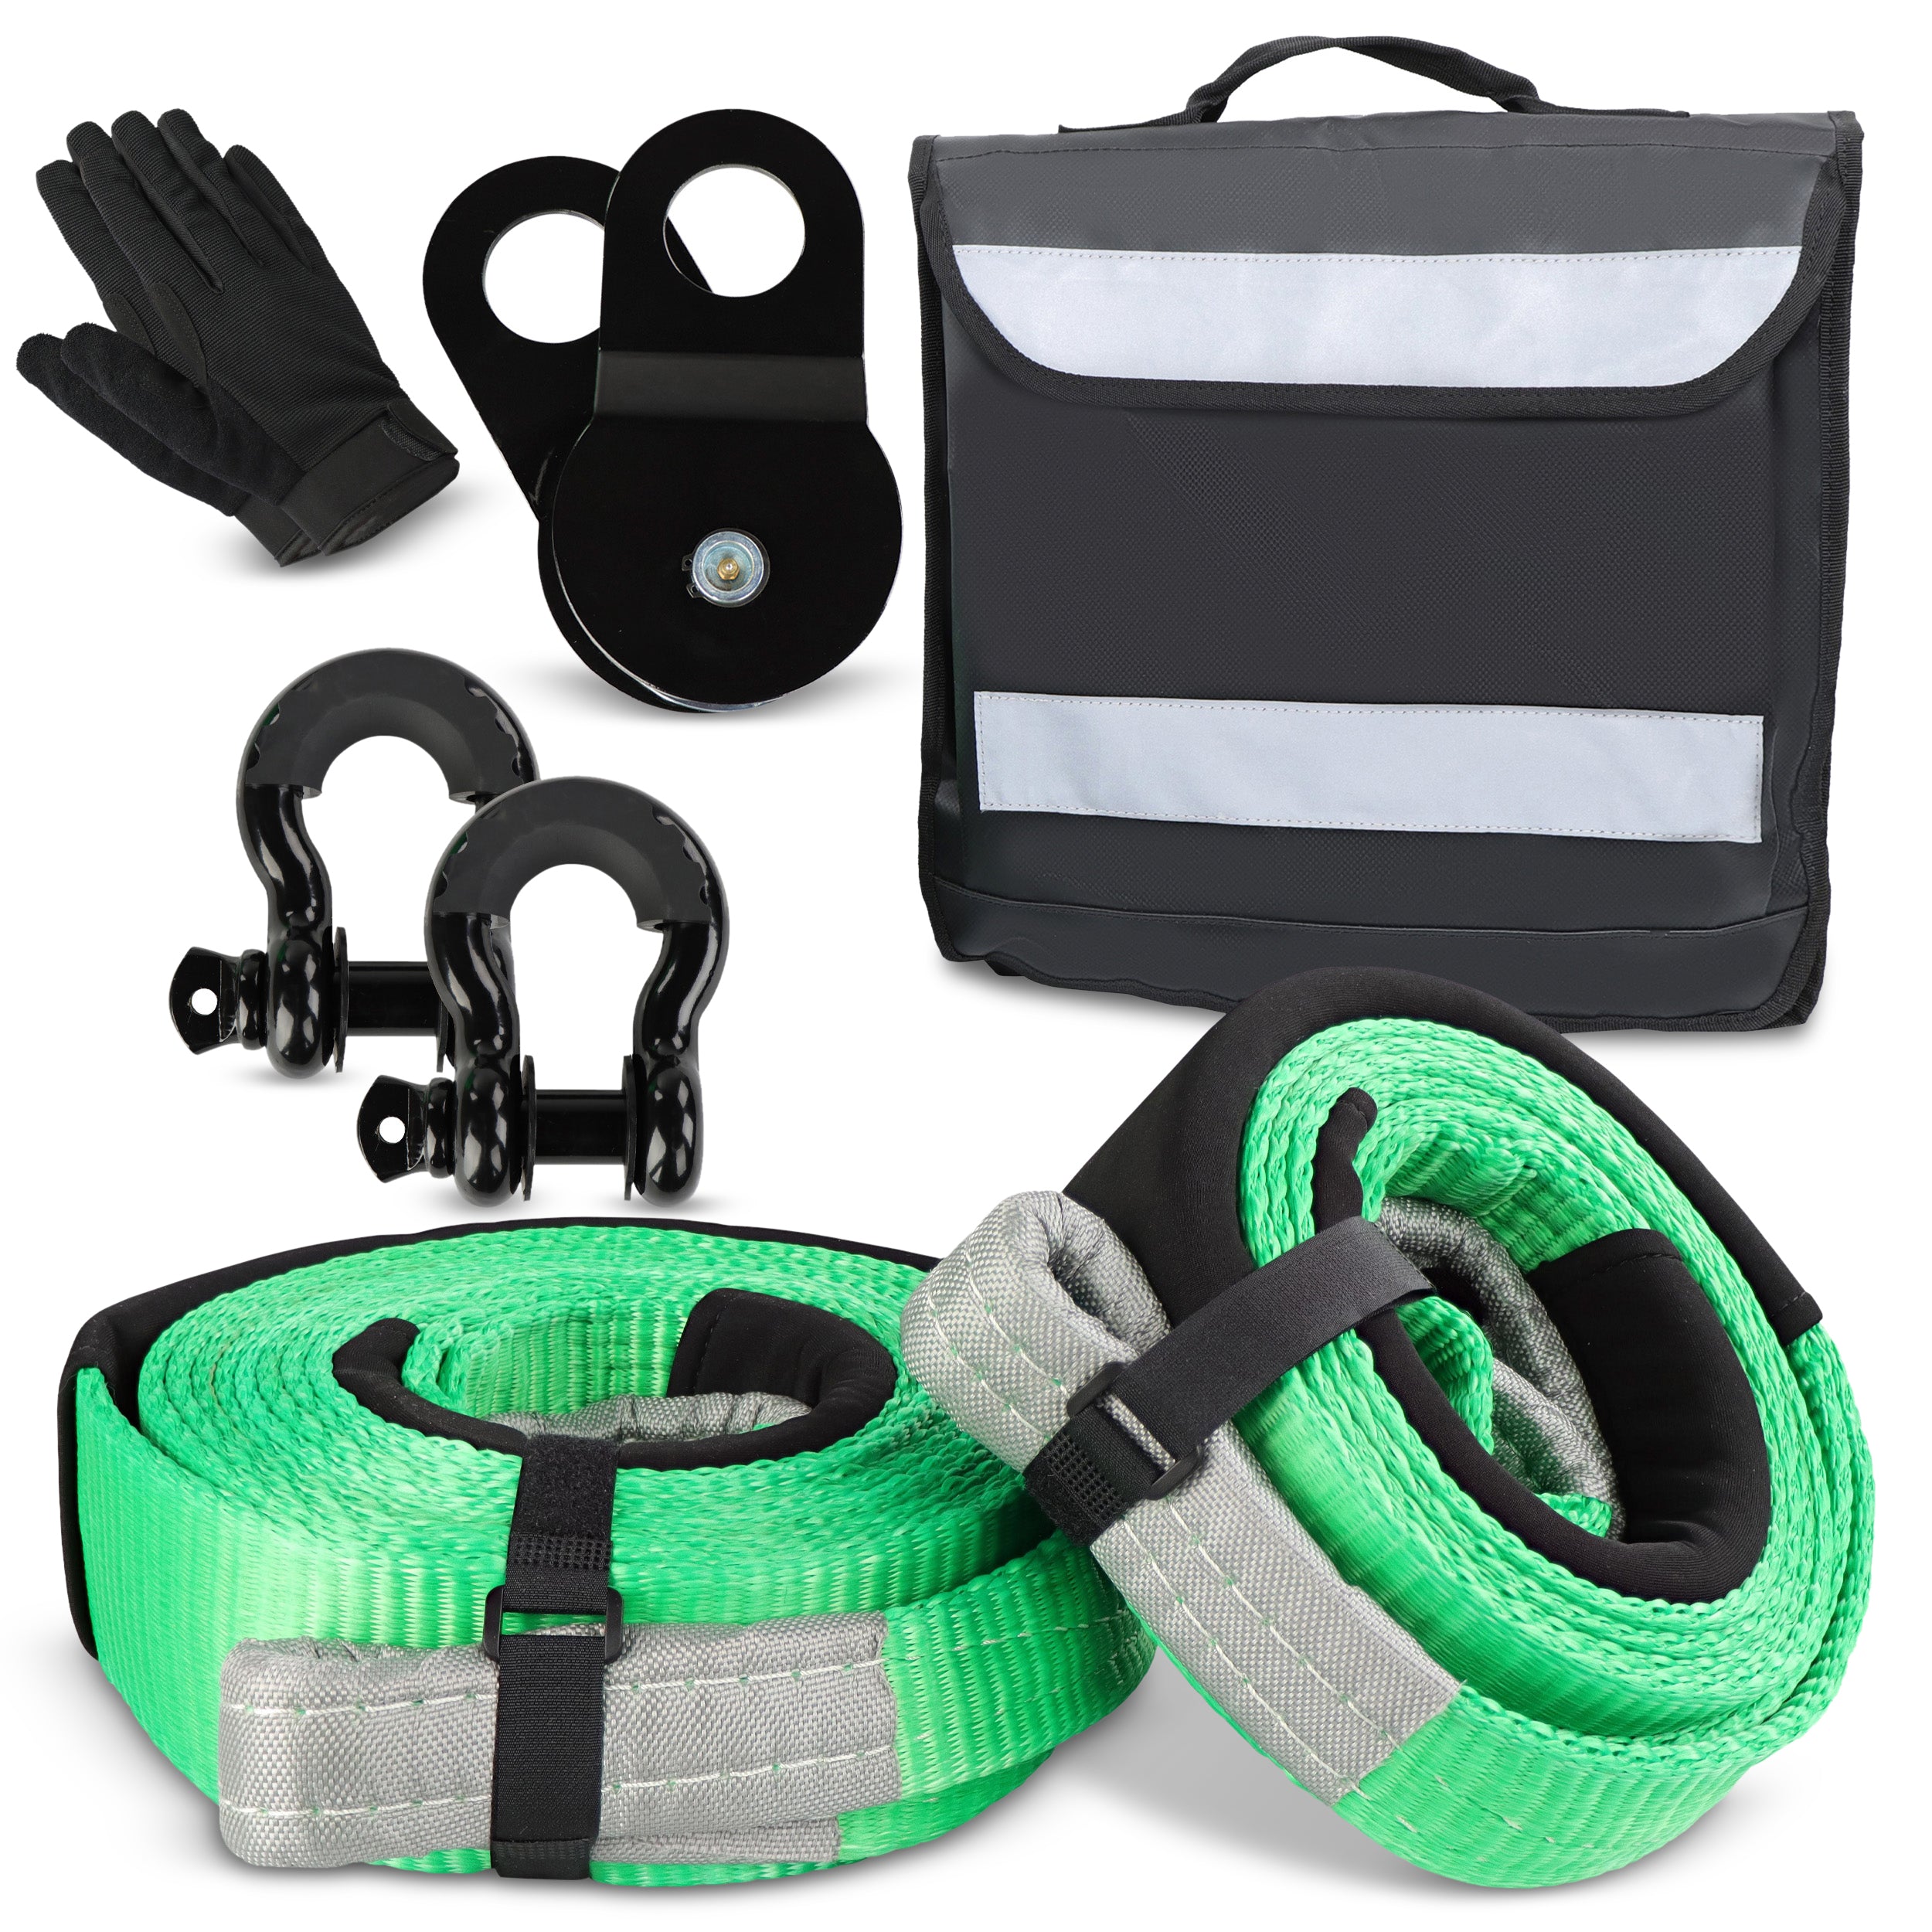 3 Meter Tow Rope, 8 Ton Heavy Duty Car Tow Belt, Road Recovery Winch Strap  Cable With Reflective Strip, Gloves And 2 Shackles